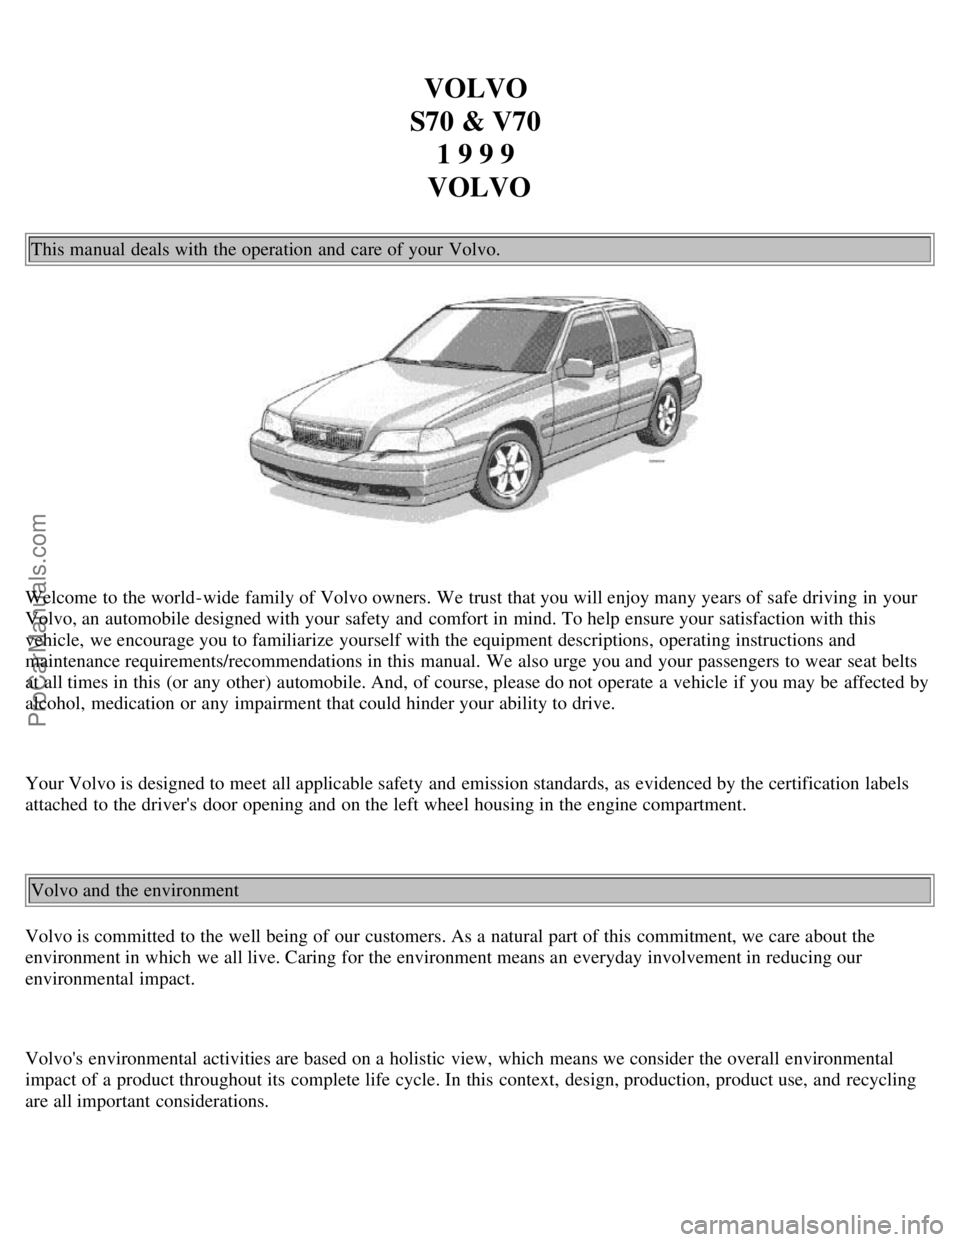 VOLVO S70 1999  Owners Manual VOLVO 
S70 & V70  1 9 9 9 
VOLVO
This manual  deals with the operation and  care of your Volvo.
Welcome to the world-wide  family of Volvo owners. We trust that you will enjoy many years of safe drivi